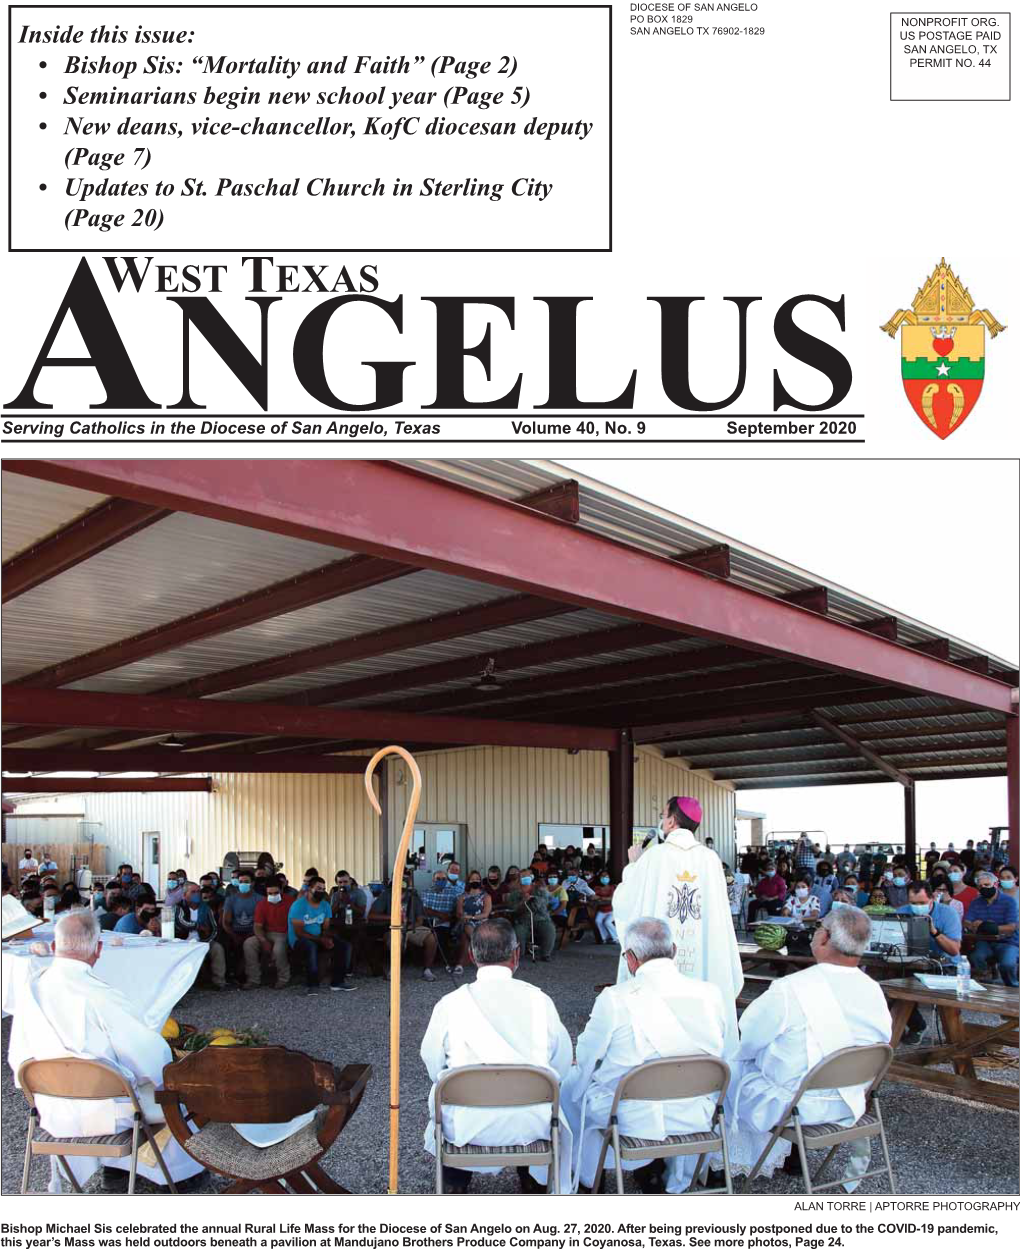 West Texas Angelus Again Over the Coming Months